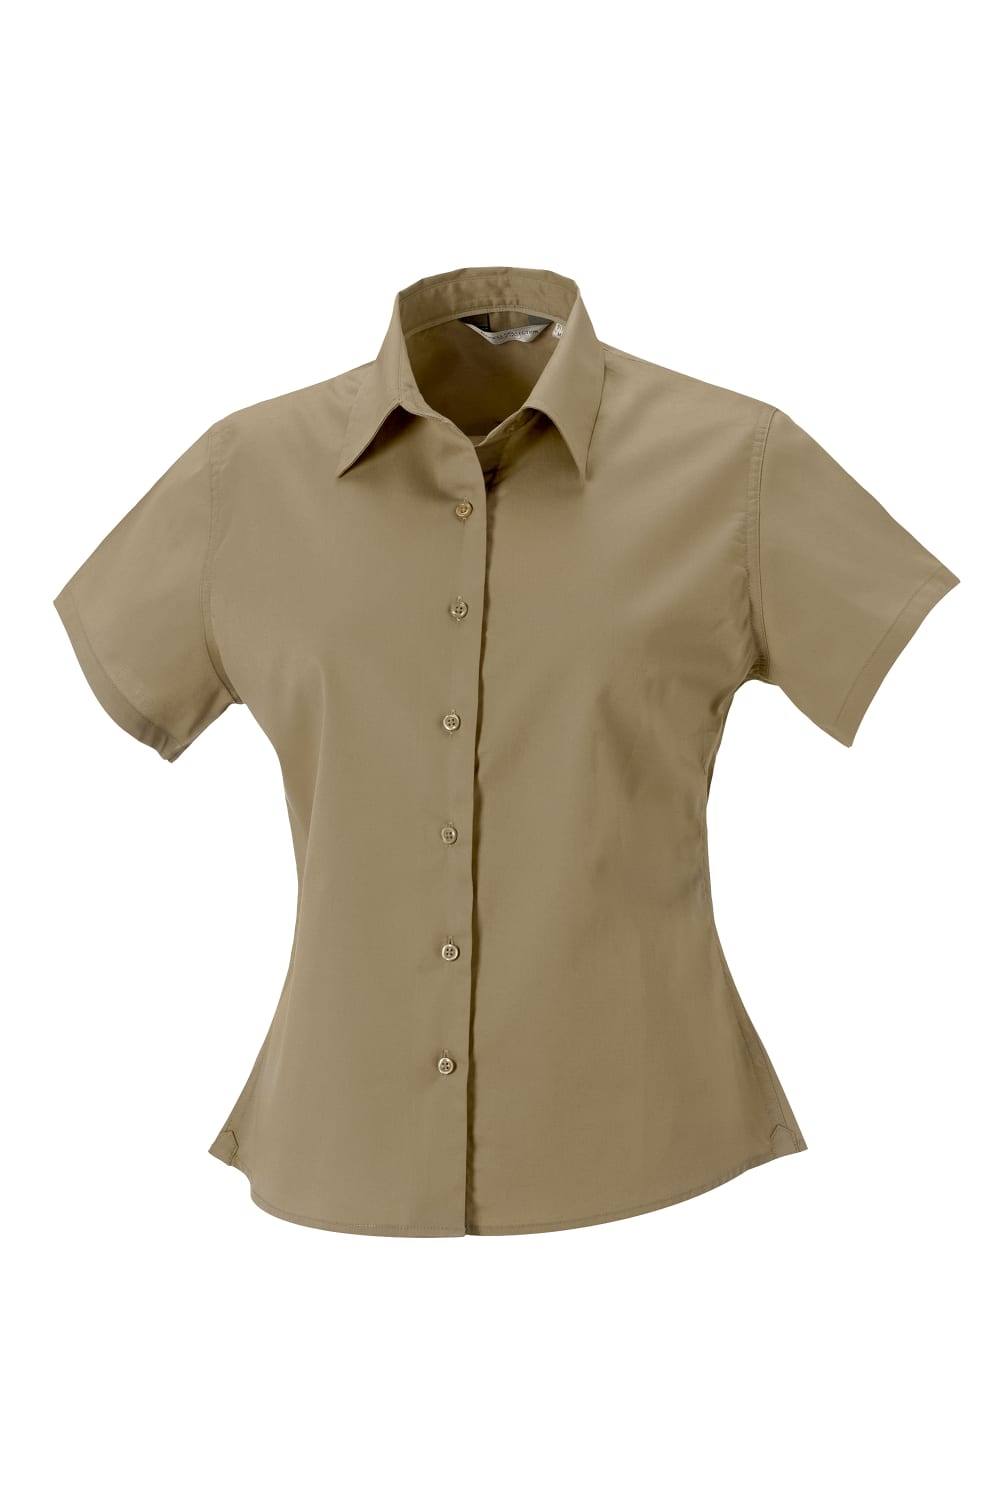 Russell Collection Womens/Ladies Short Sleeve Classic Twill Shirt (Khaki)